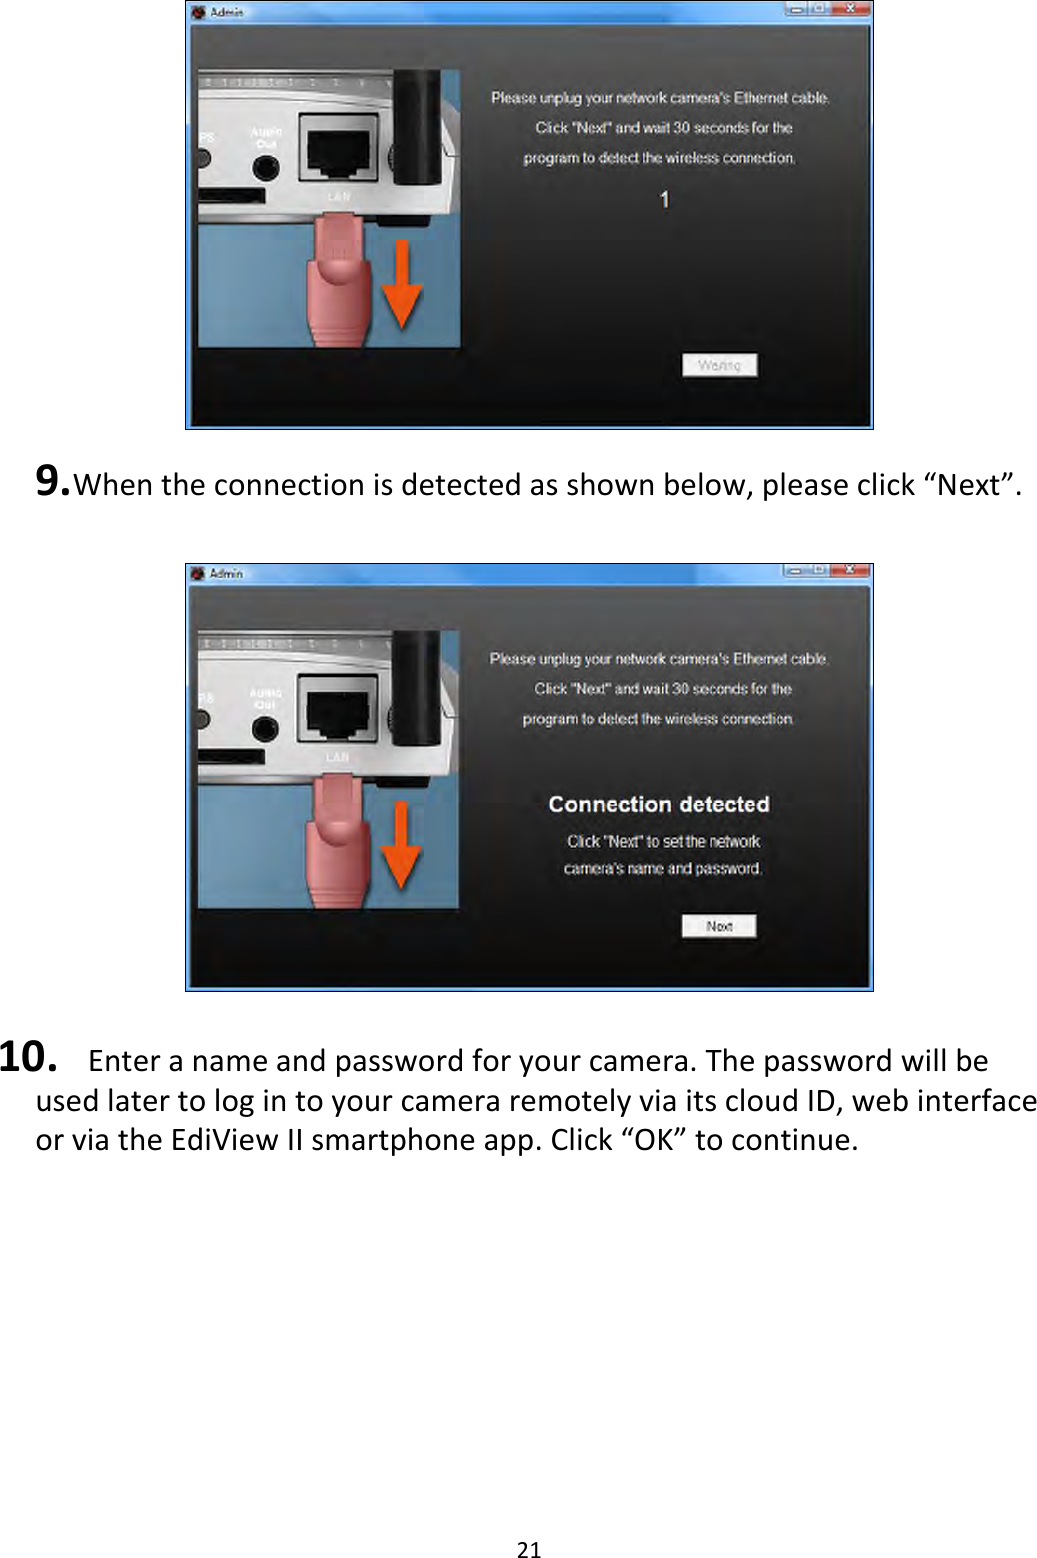 21   9. When the connection is detected as shown below, please click “Next”.    10.   Enter a name and password for your camera. The password will be used later to log in to your camera remotely via its cloud ID, web interface or via the EdiView II smartphone app. Click “OK” to continue.  